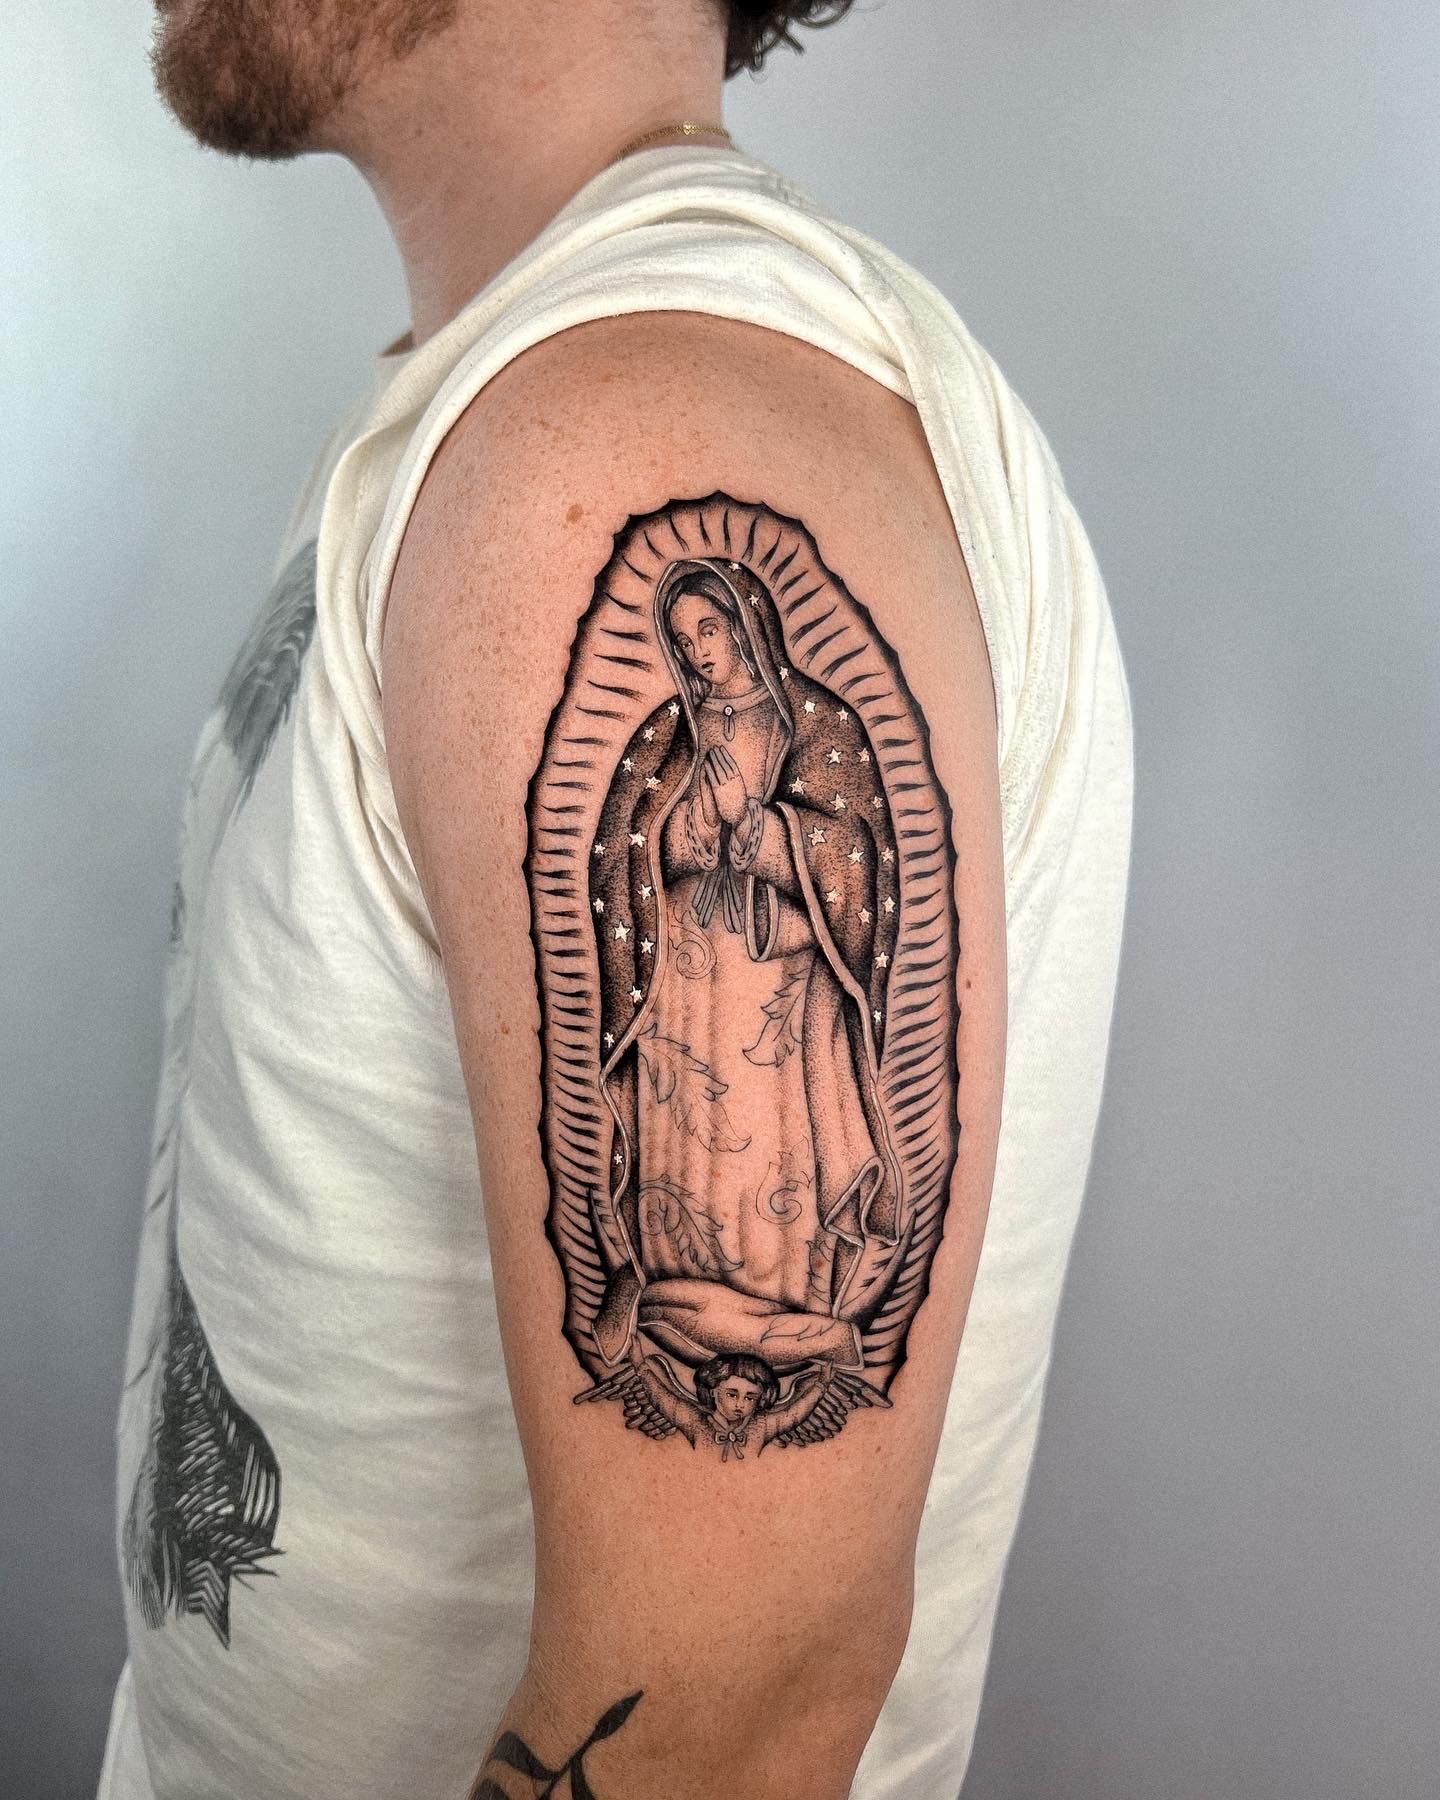 Ink Sessions Tattoo Virgin of Guadalupe Tattoo